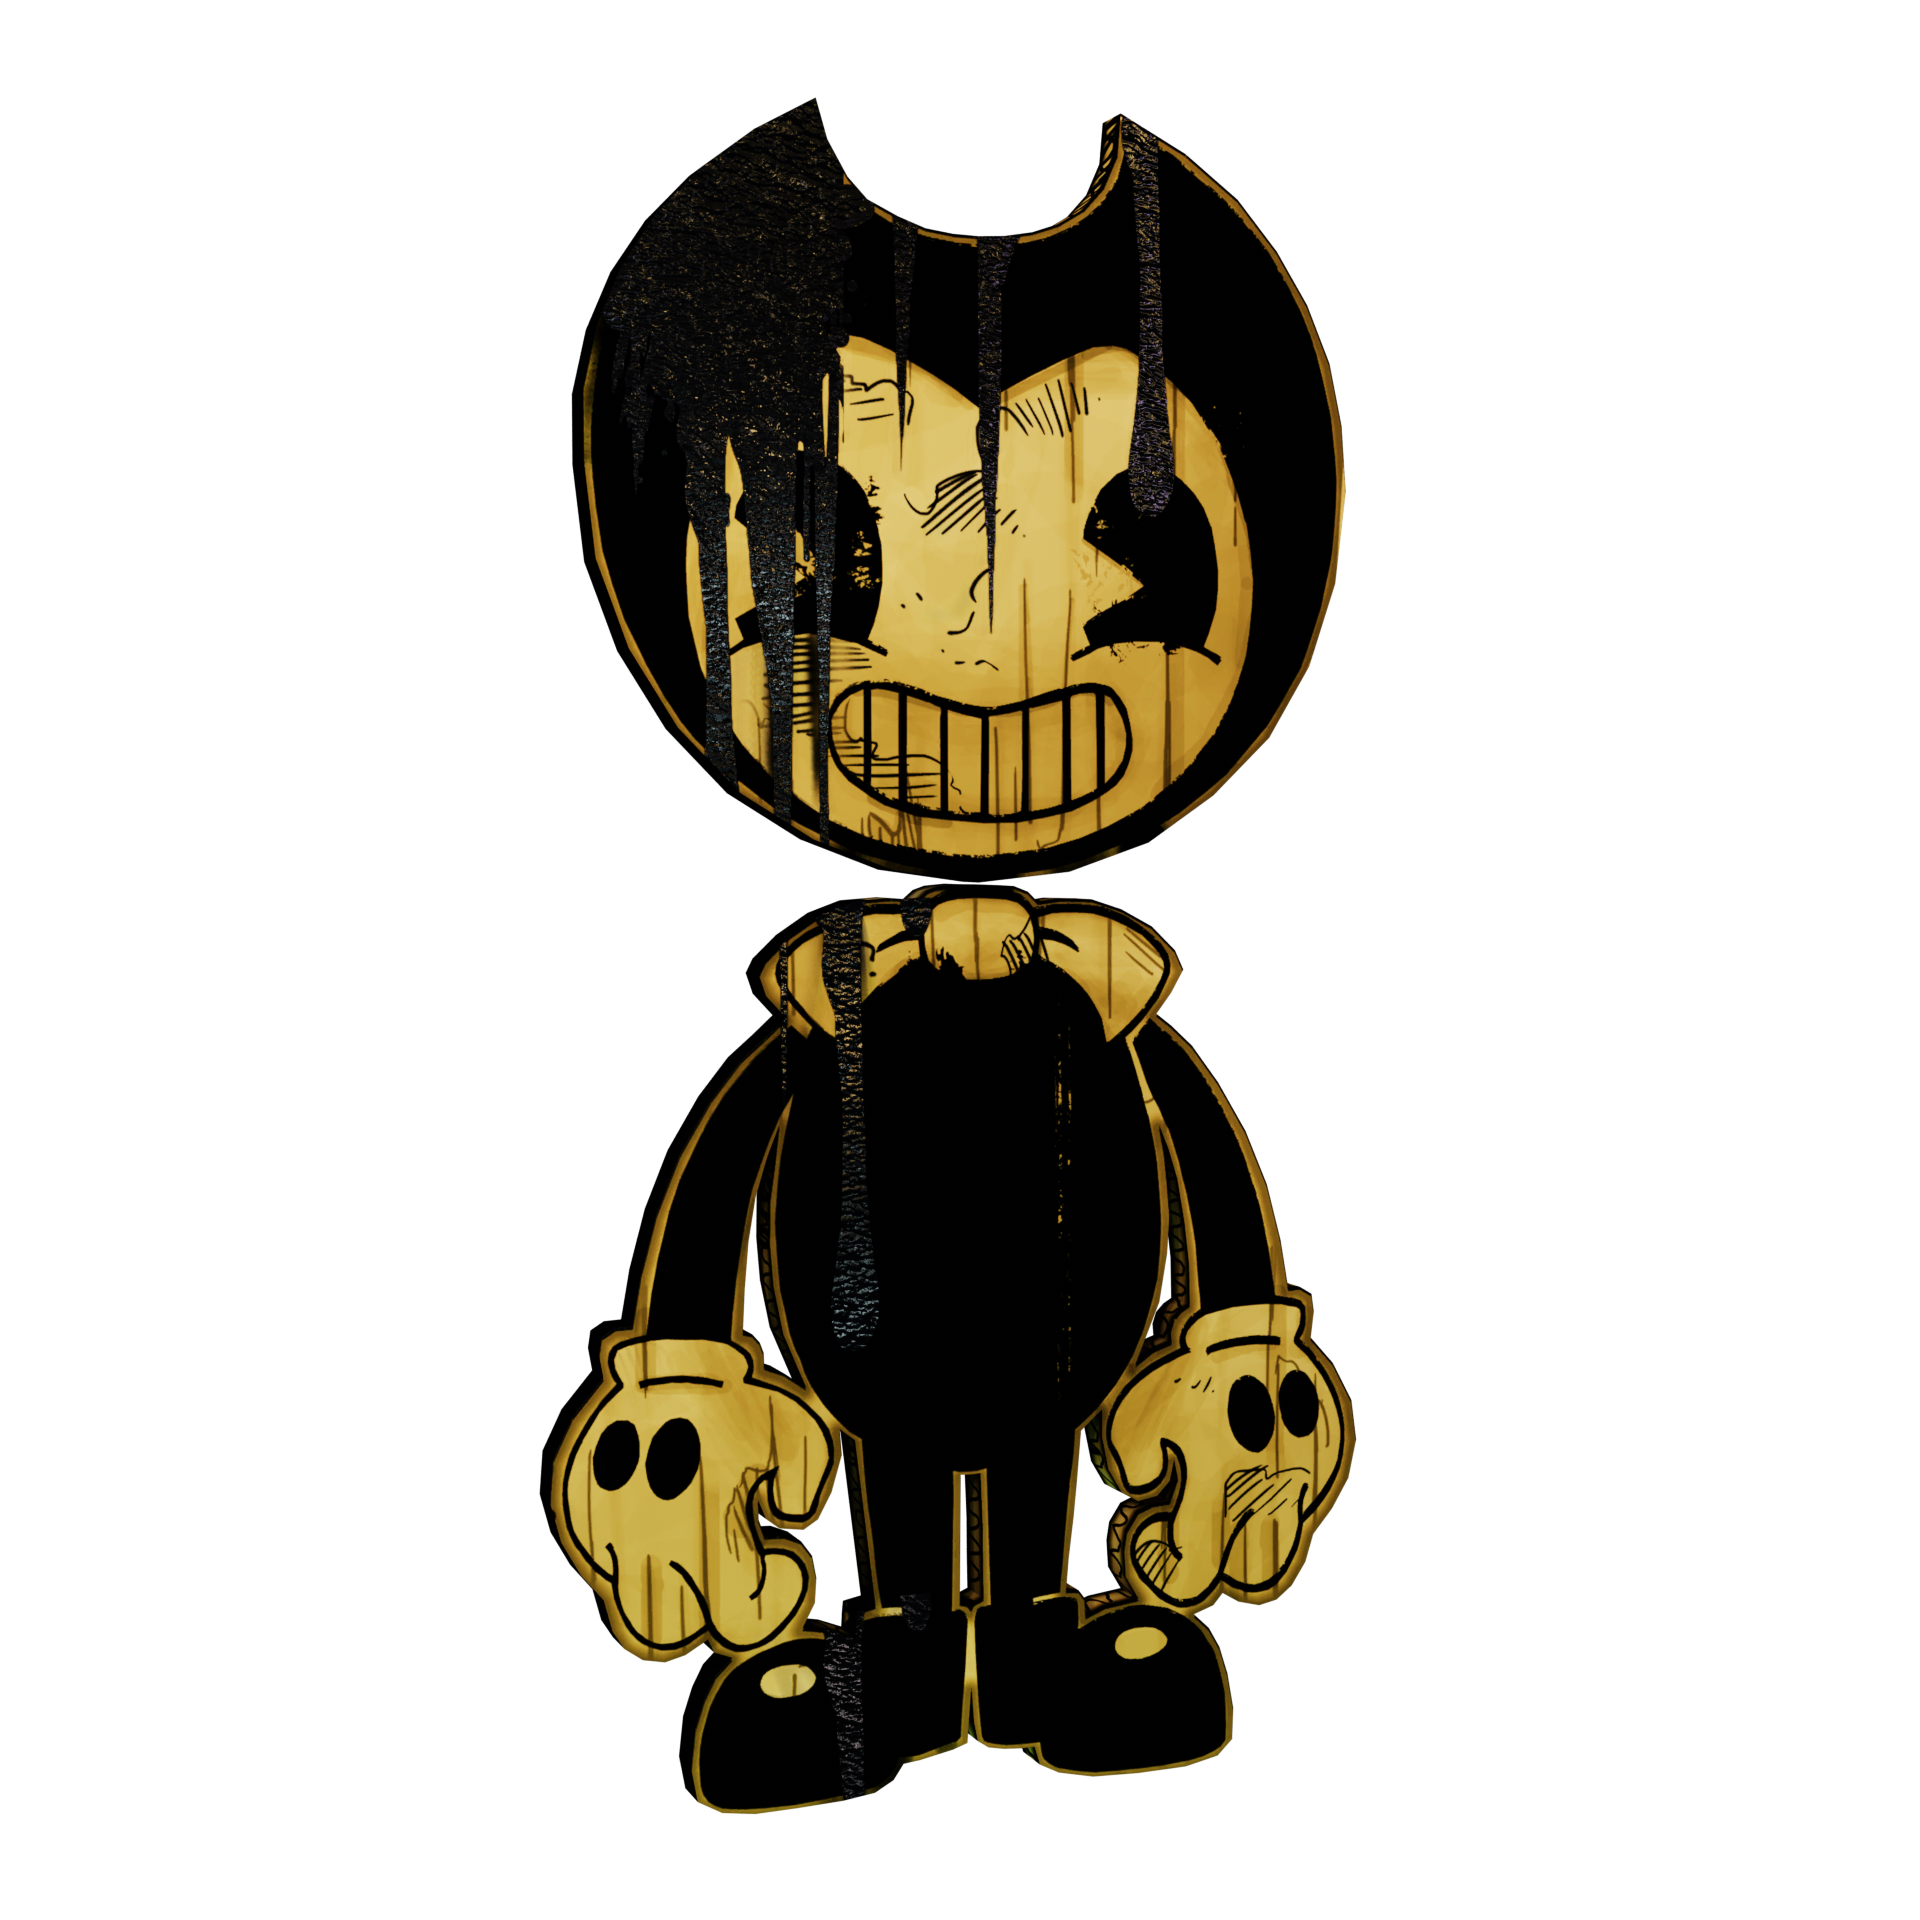 Bendy and the Ink Machine dev has another large scale Bendy game in the  works